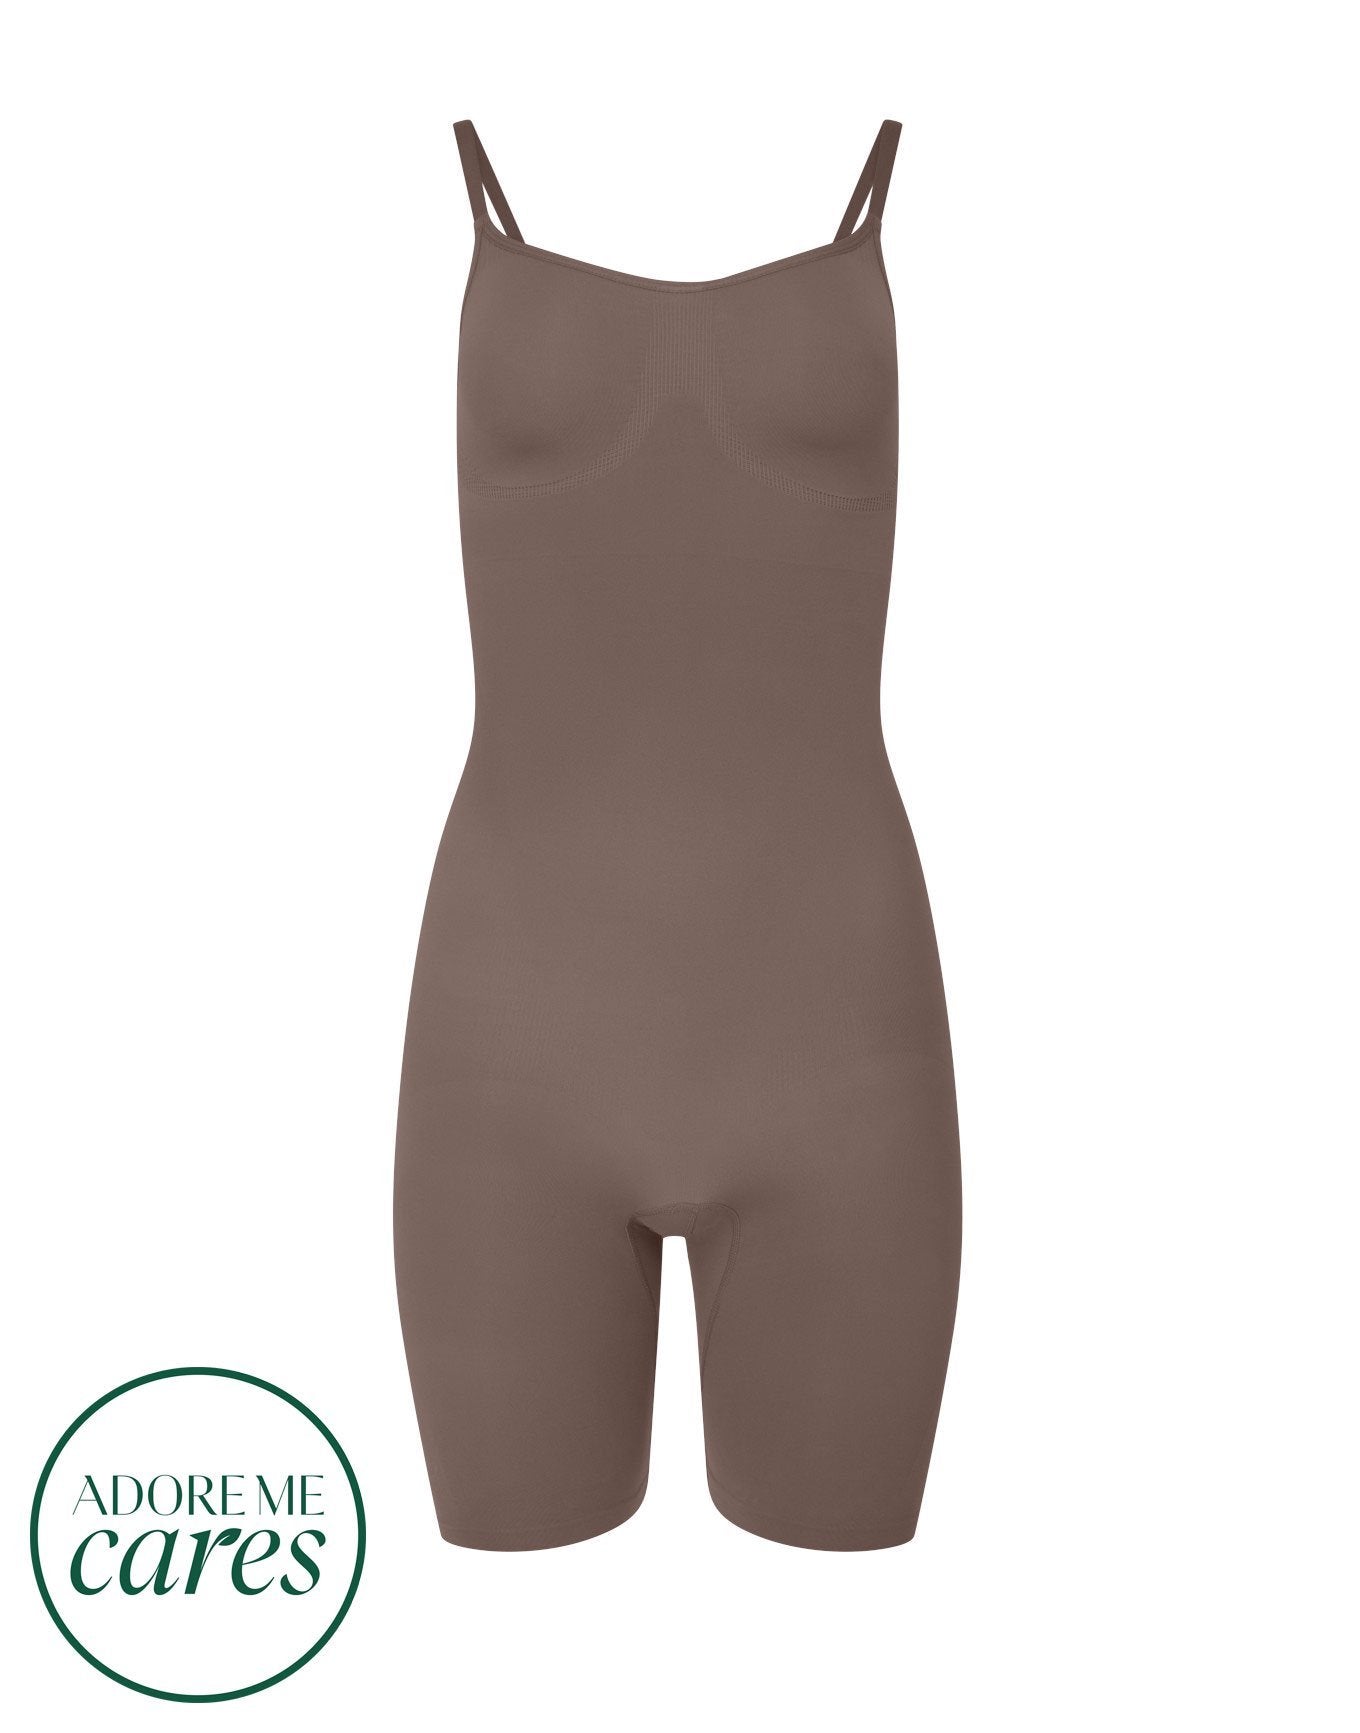 nueskin Analise High-Compression Bodysuit in color Deep Taupe and shape bodysuit